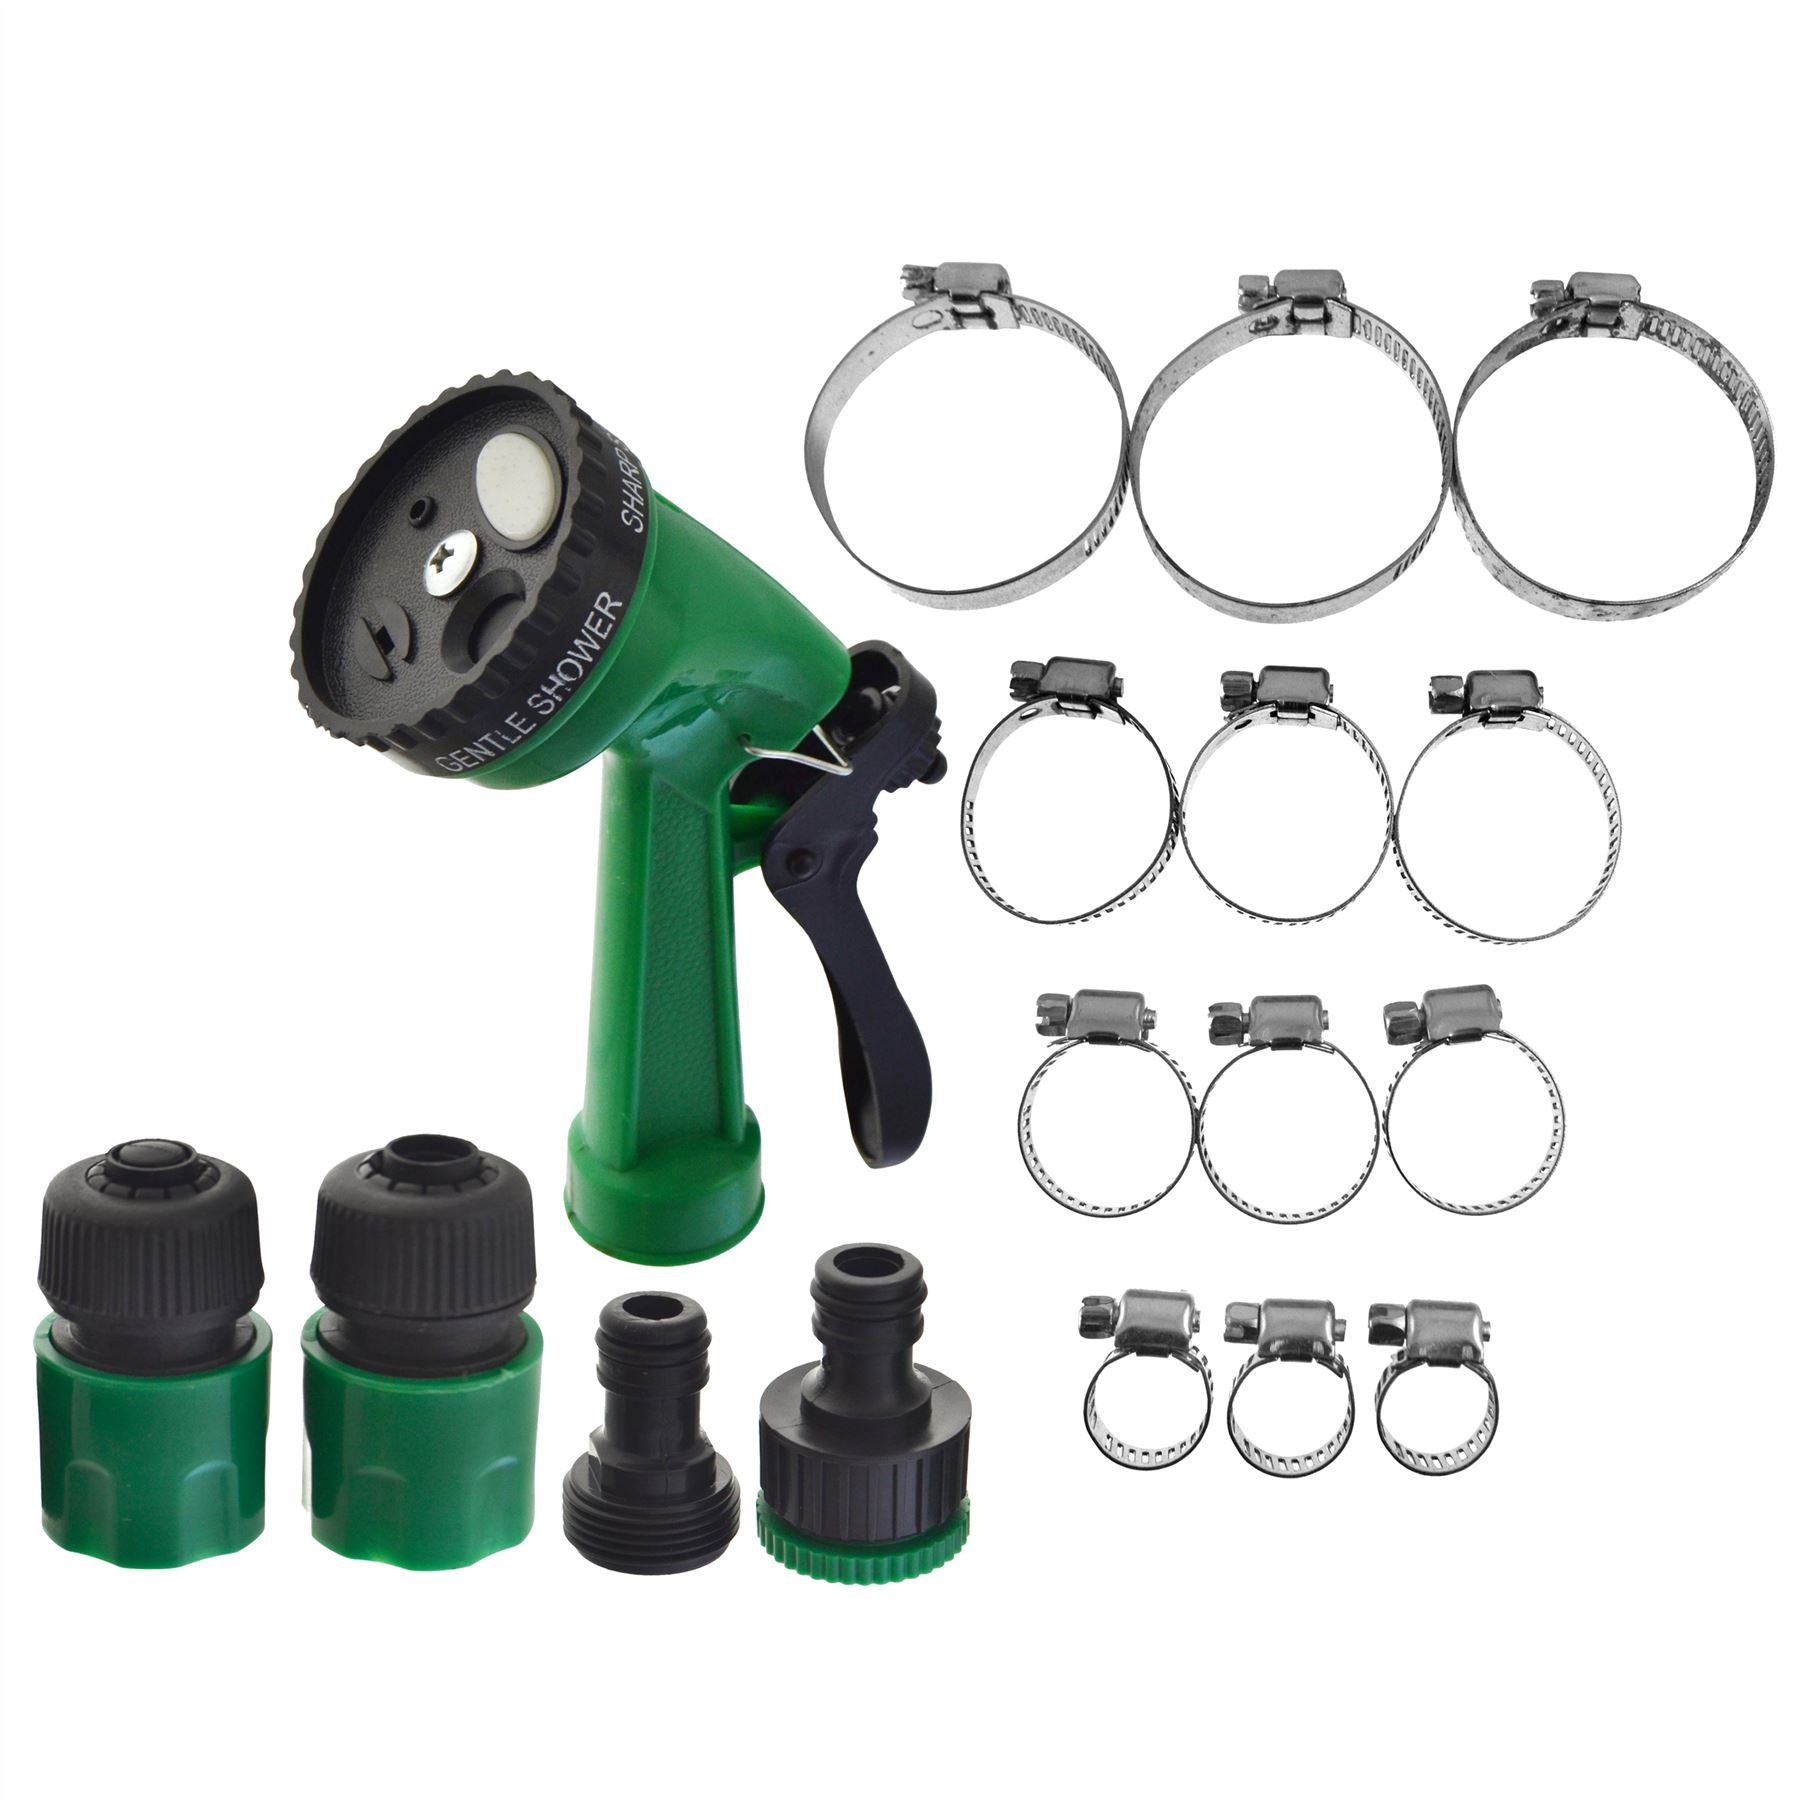 6pc Adjustable Hose Pipe Connectors Fittings Sprayer & 12pc Clamp Jubilee Clip